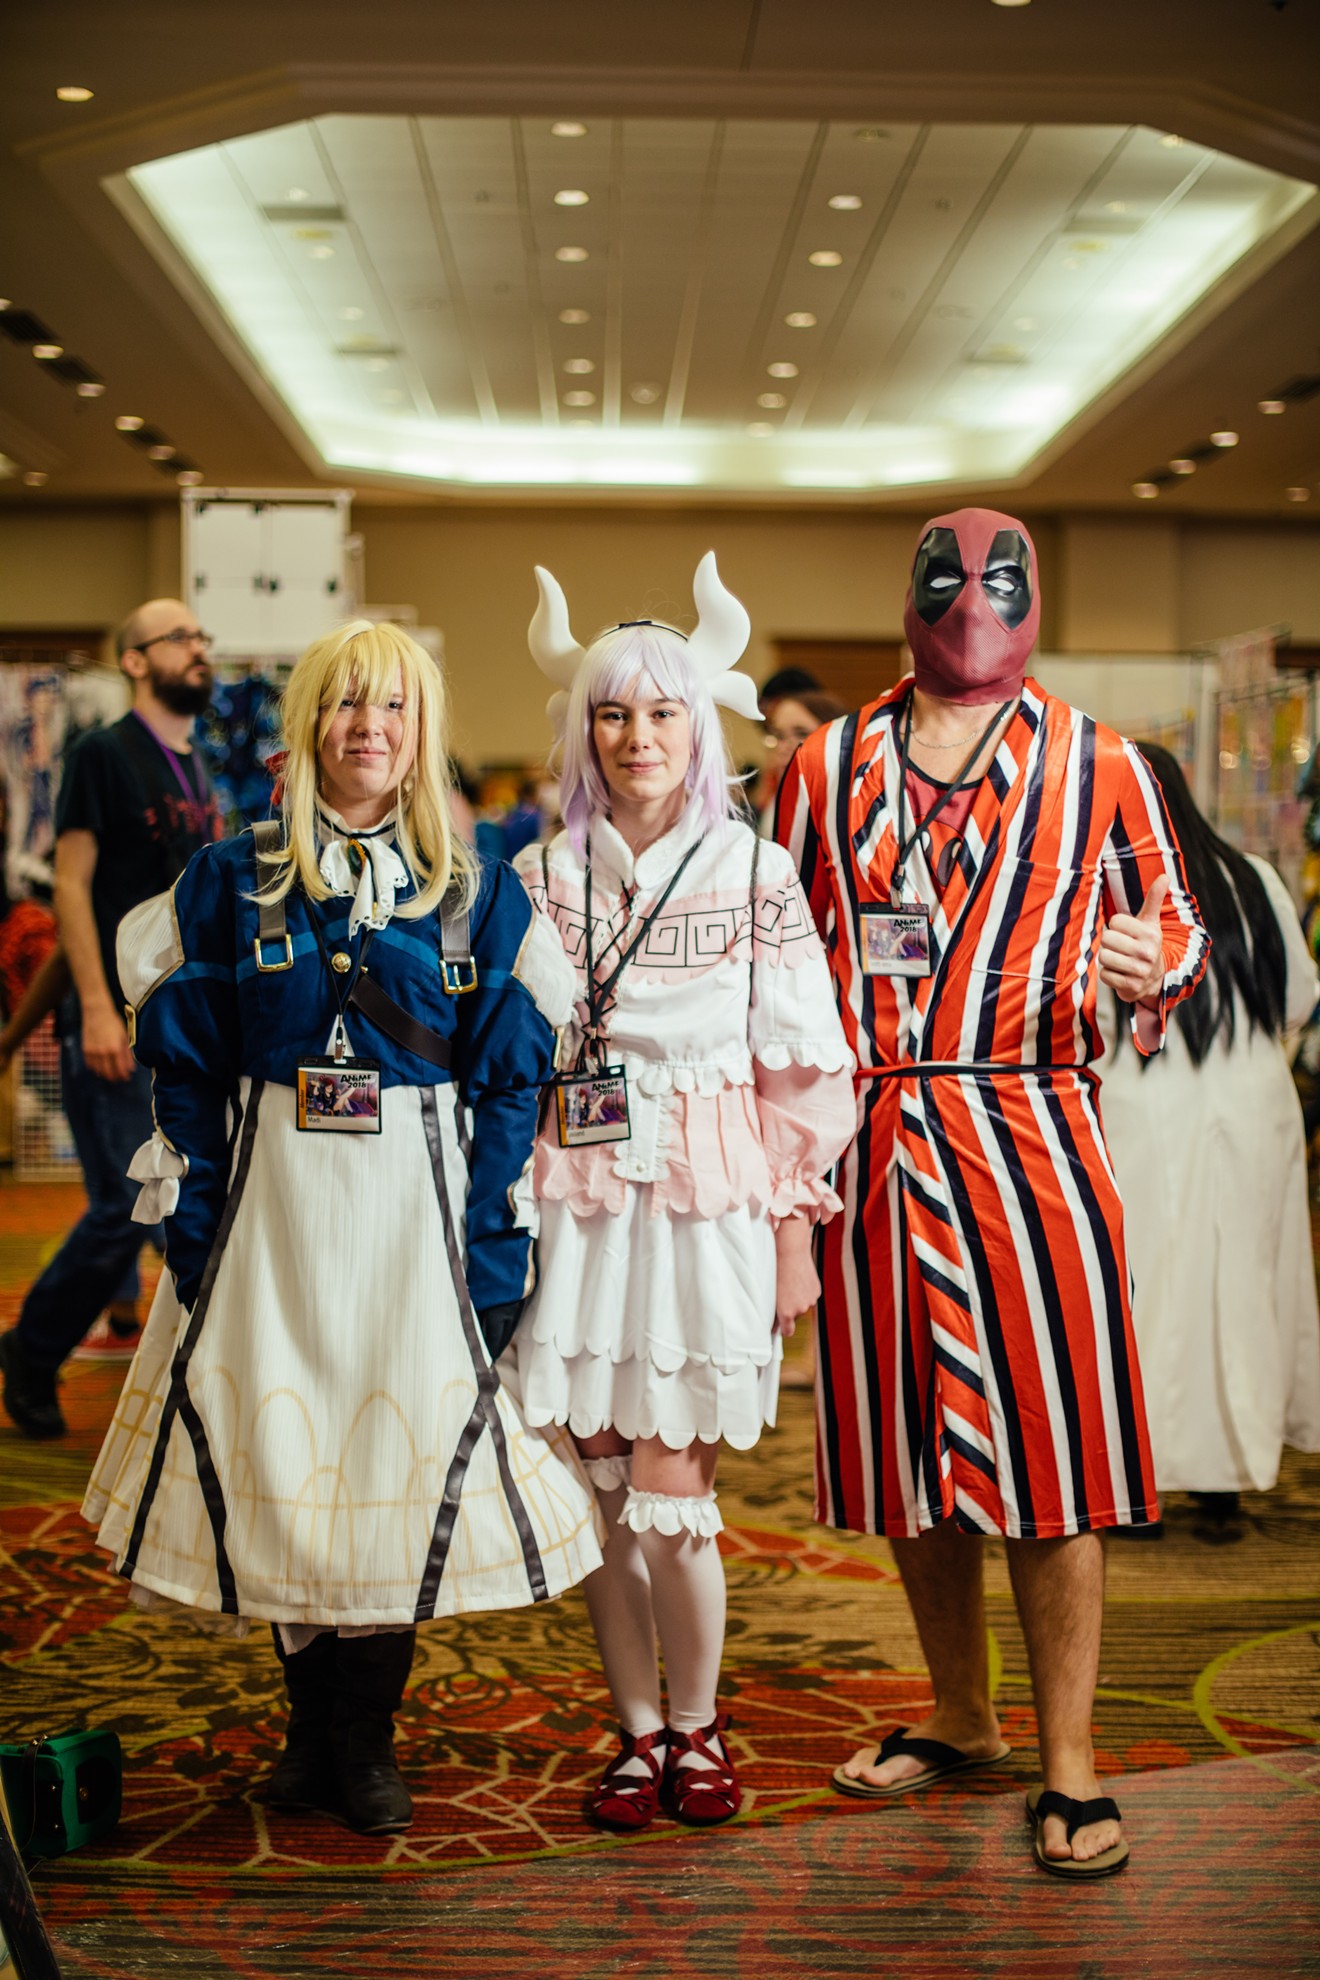 AnimeFest takes place this week, so get into it.